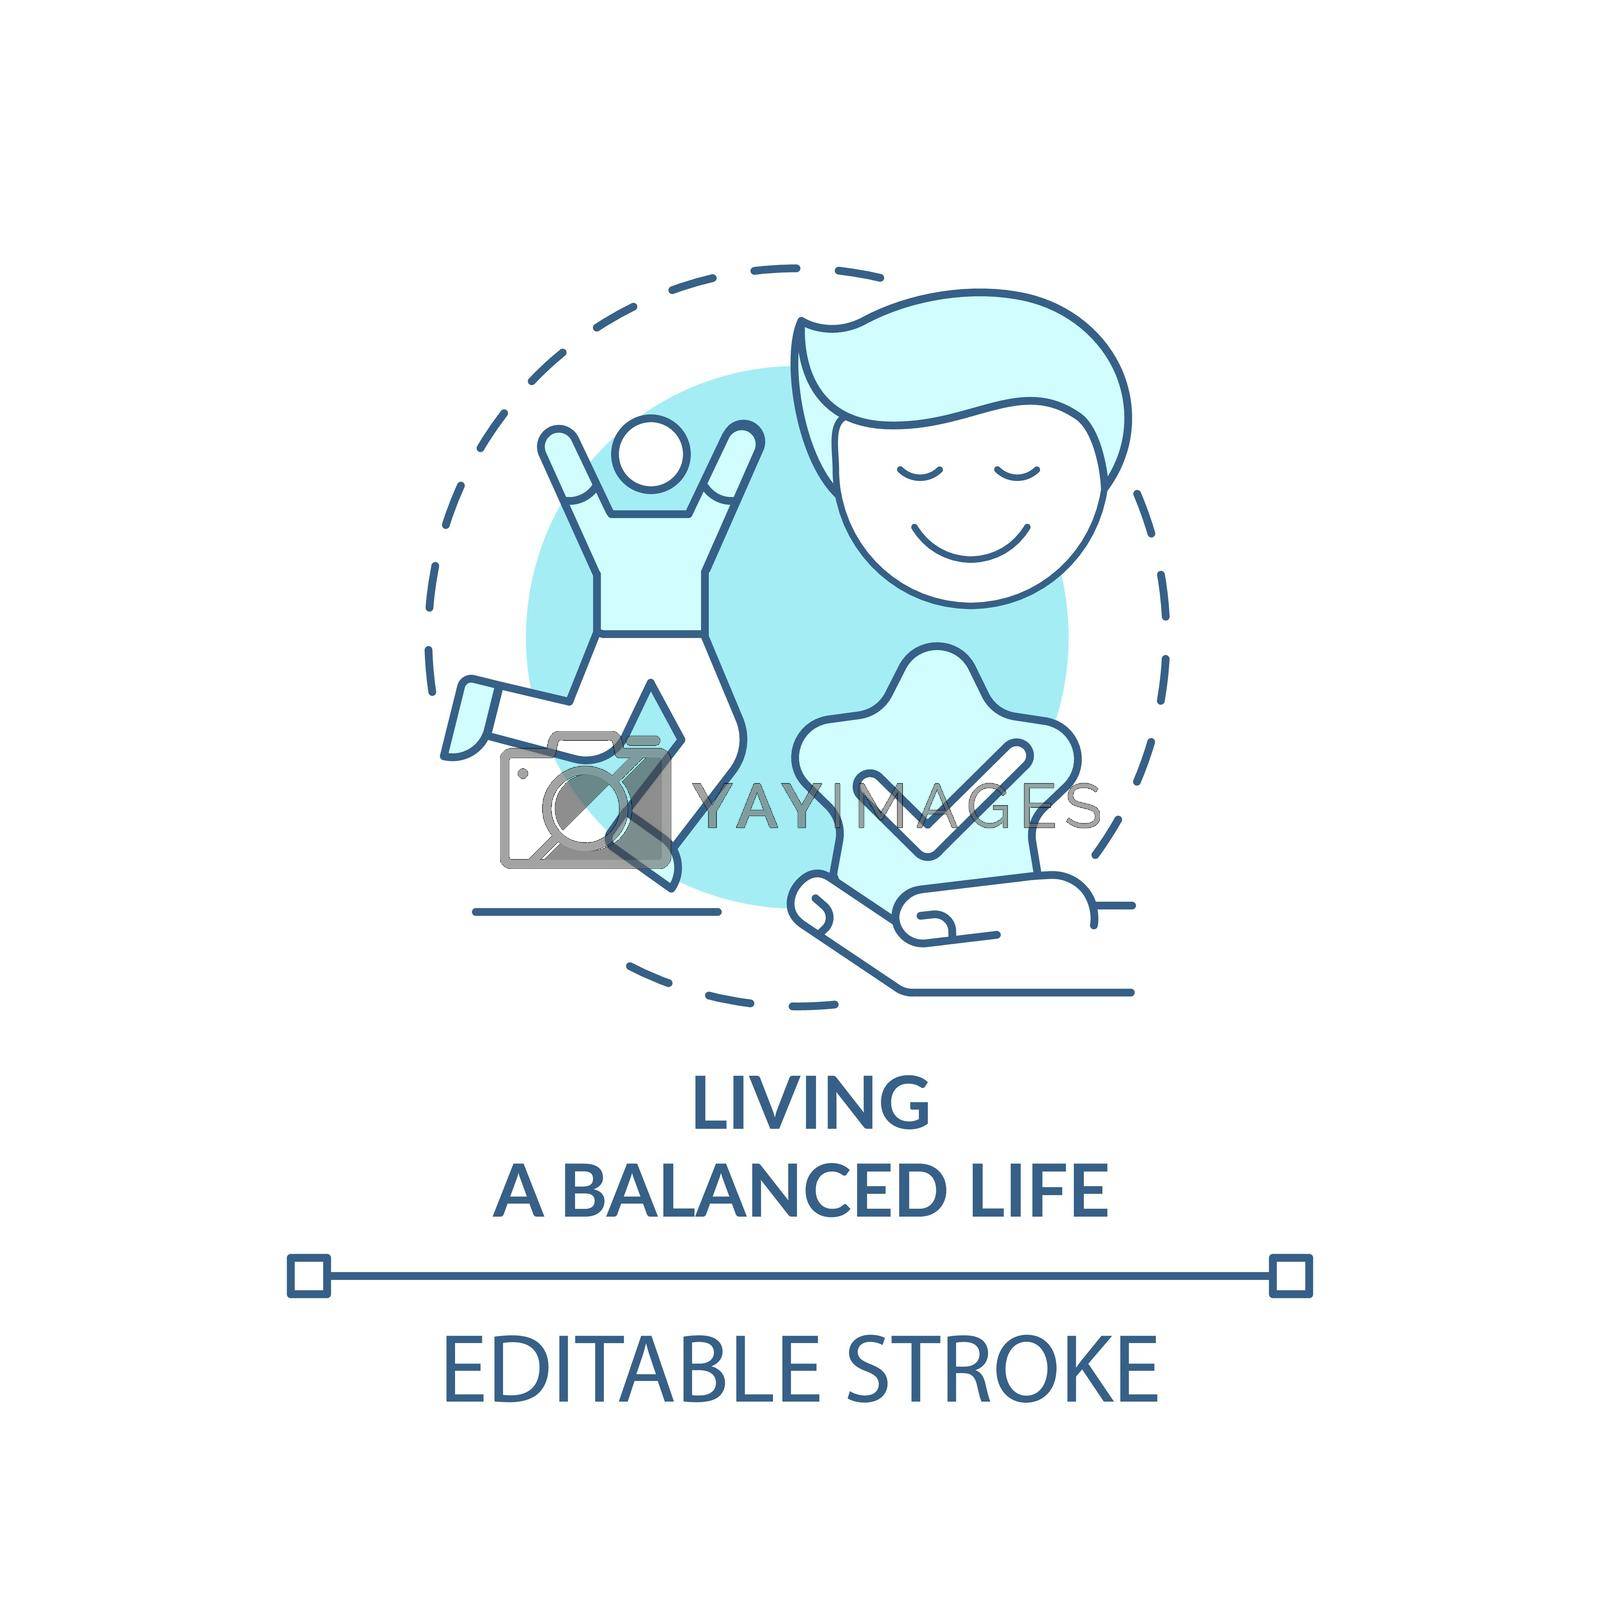 Royalty free image of Living a balanced life concept icon by bsd